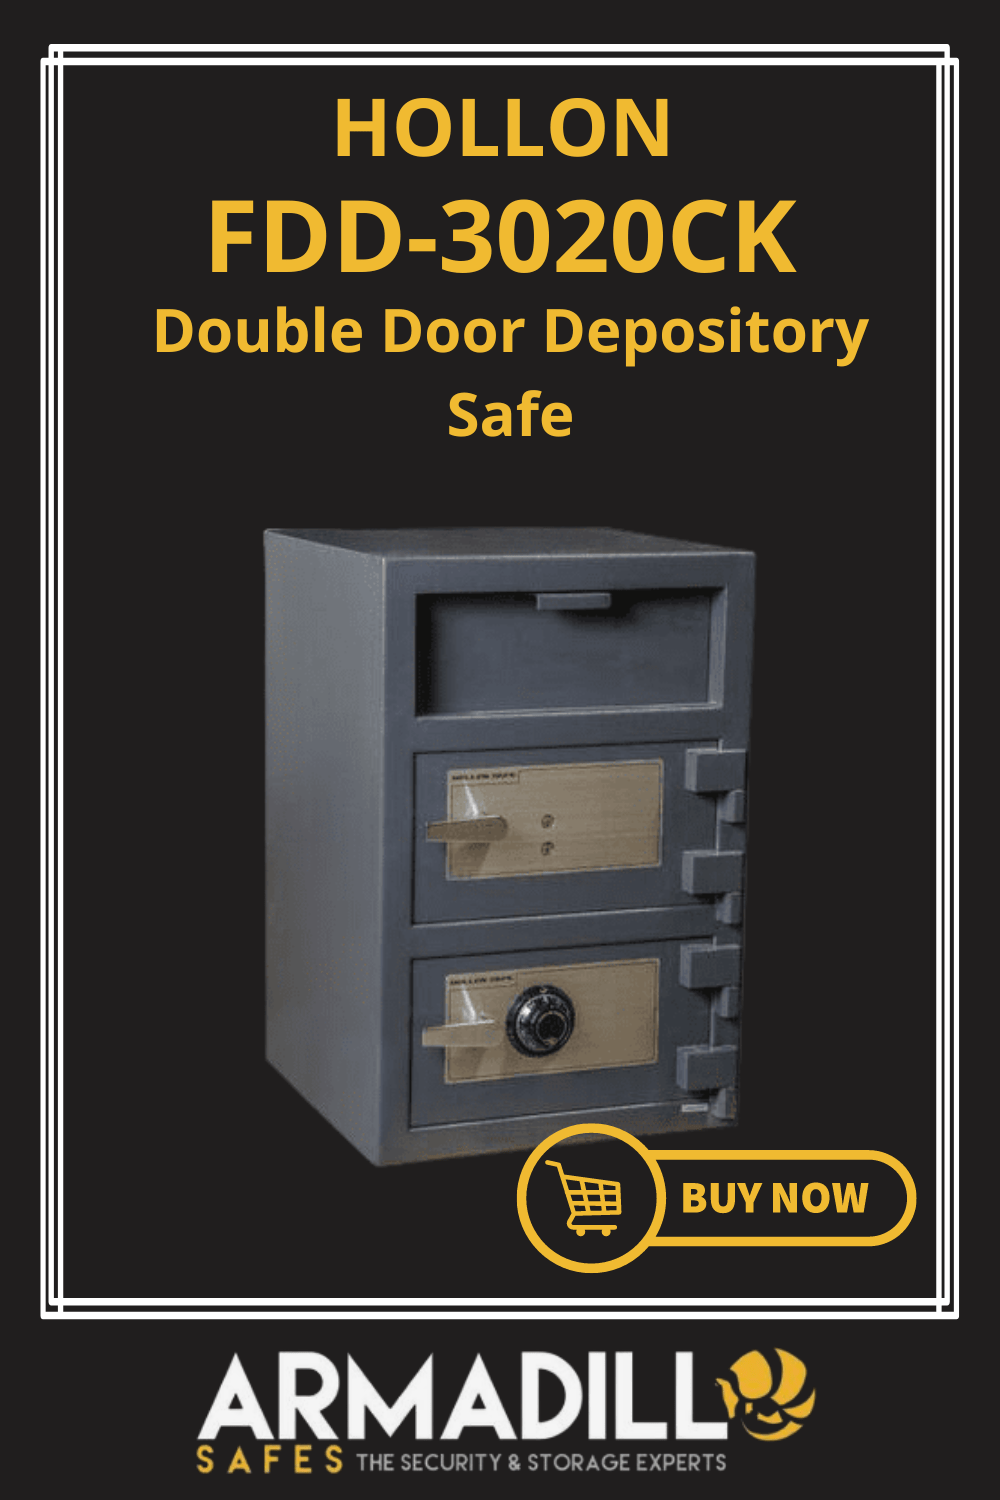 Hollon FDD-3020CK Double Door Depository Safe Armadillo Safe and Vault